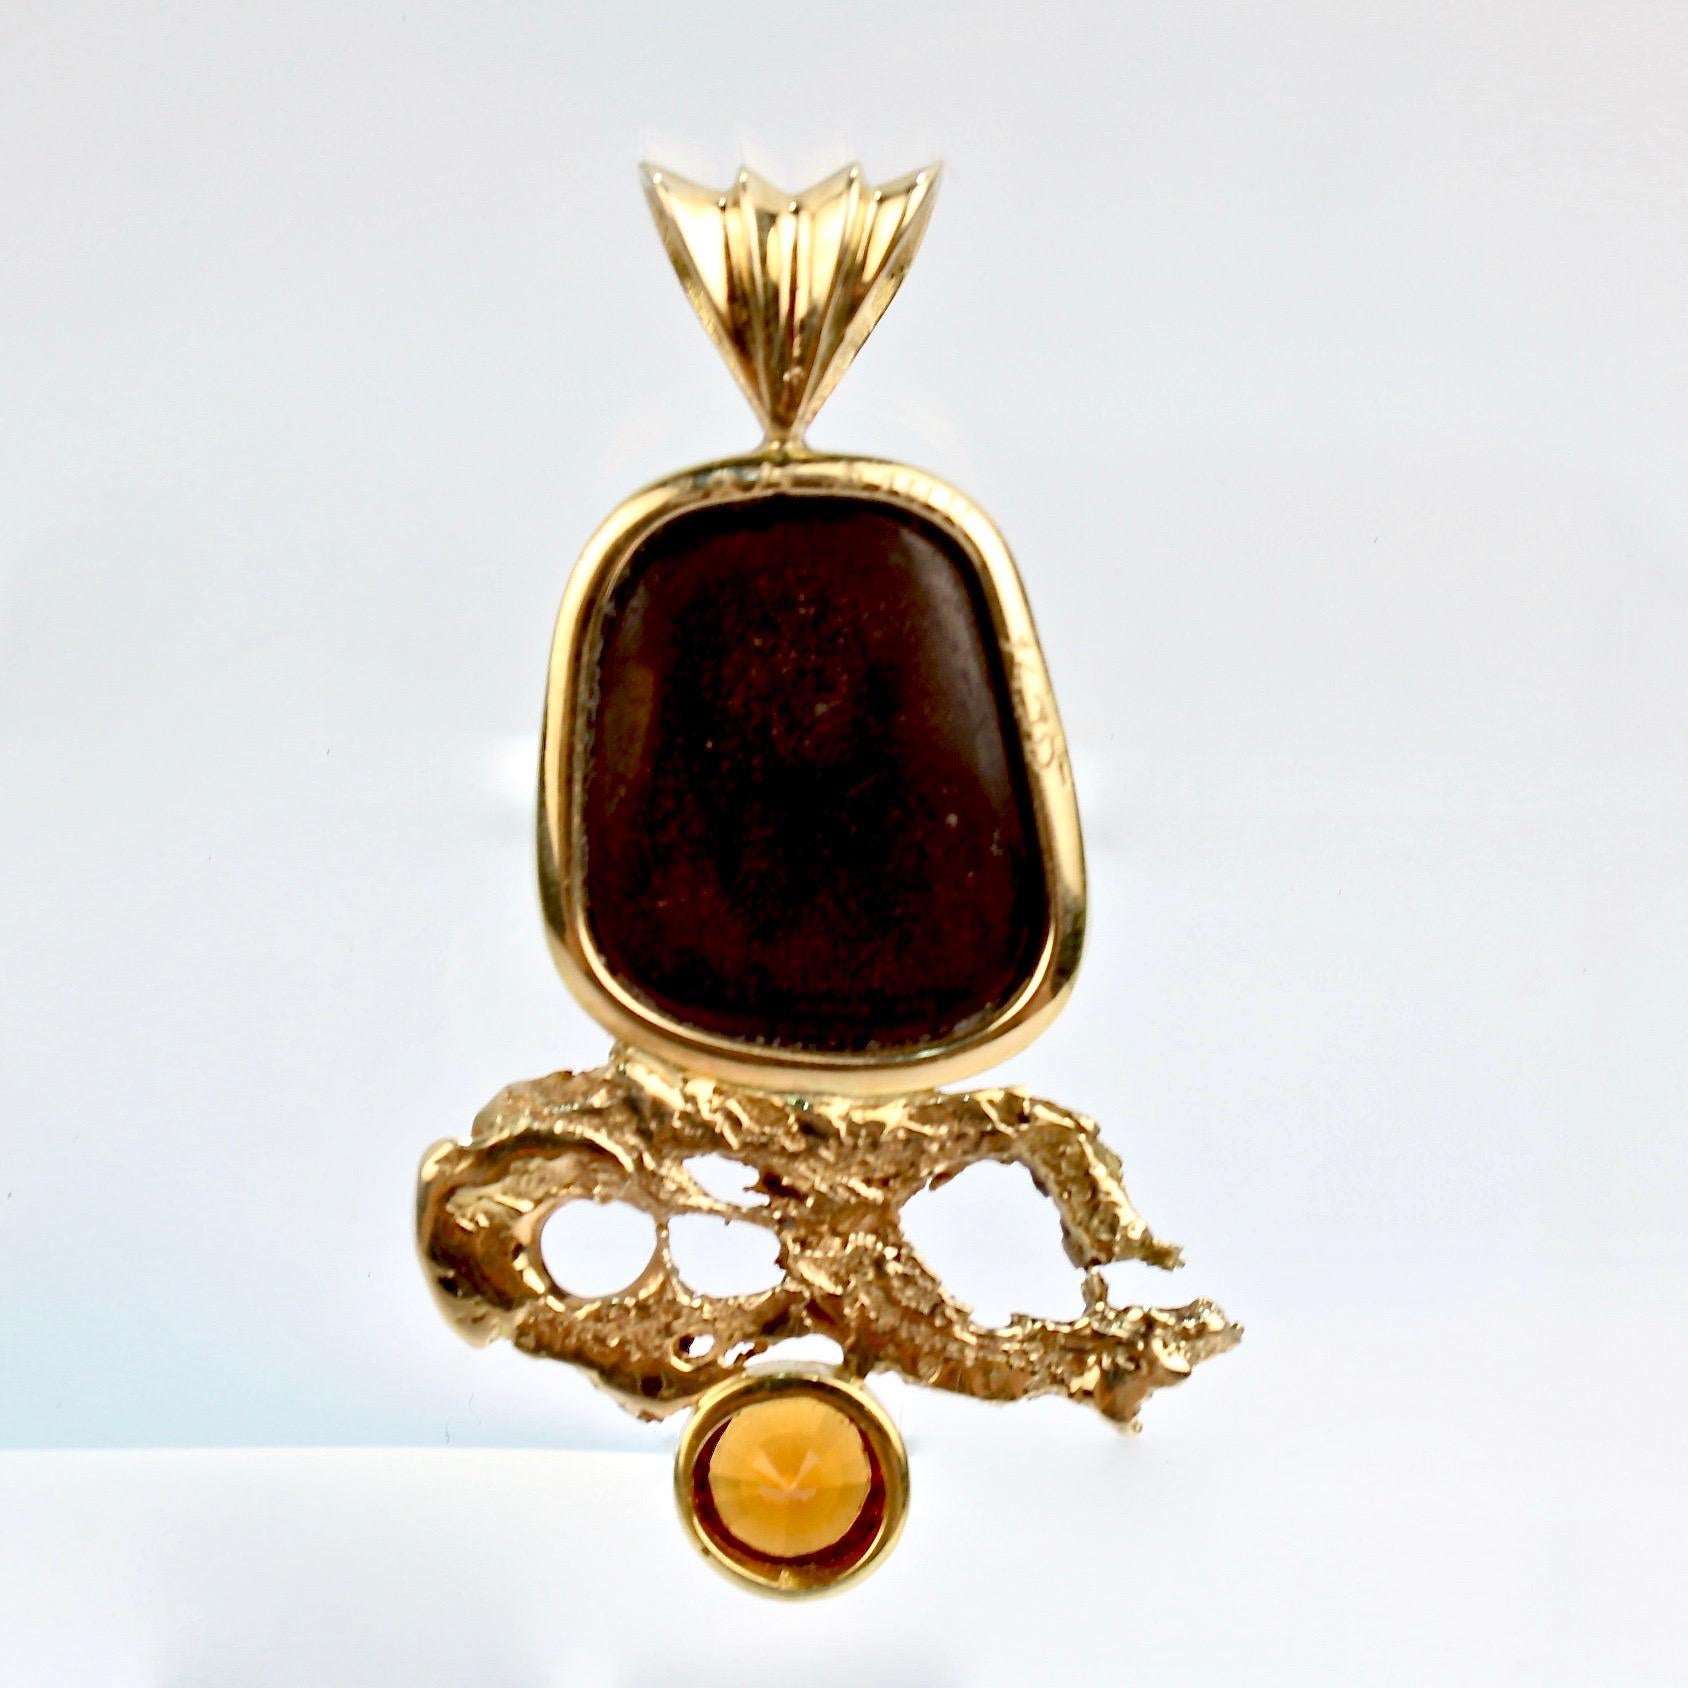 A very fine organic modernist pendant.

With a large bezel set opal and a round-cut Madeira citrine in 14 karat and 22 karat gold.

This fire in this opal dazzles and is perfectly offset by the complimentary orange of the Madeira citrine. Simply